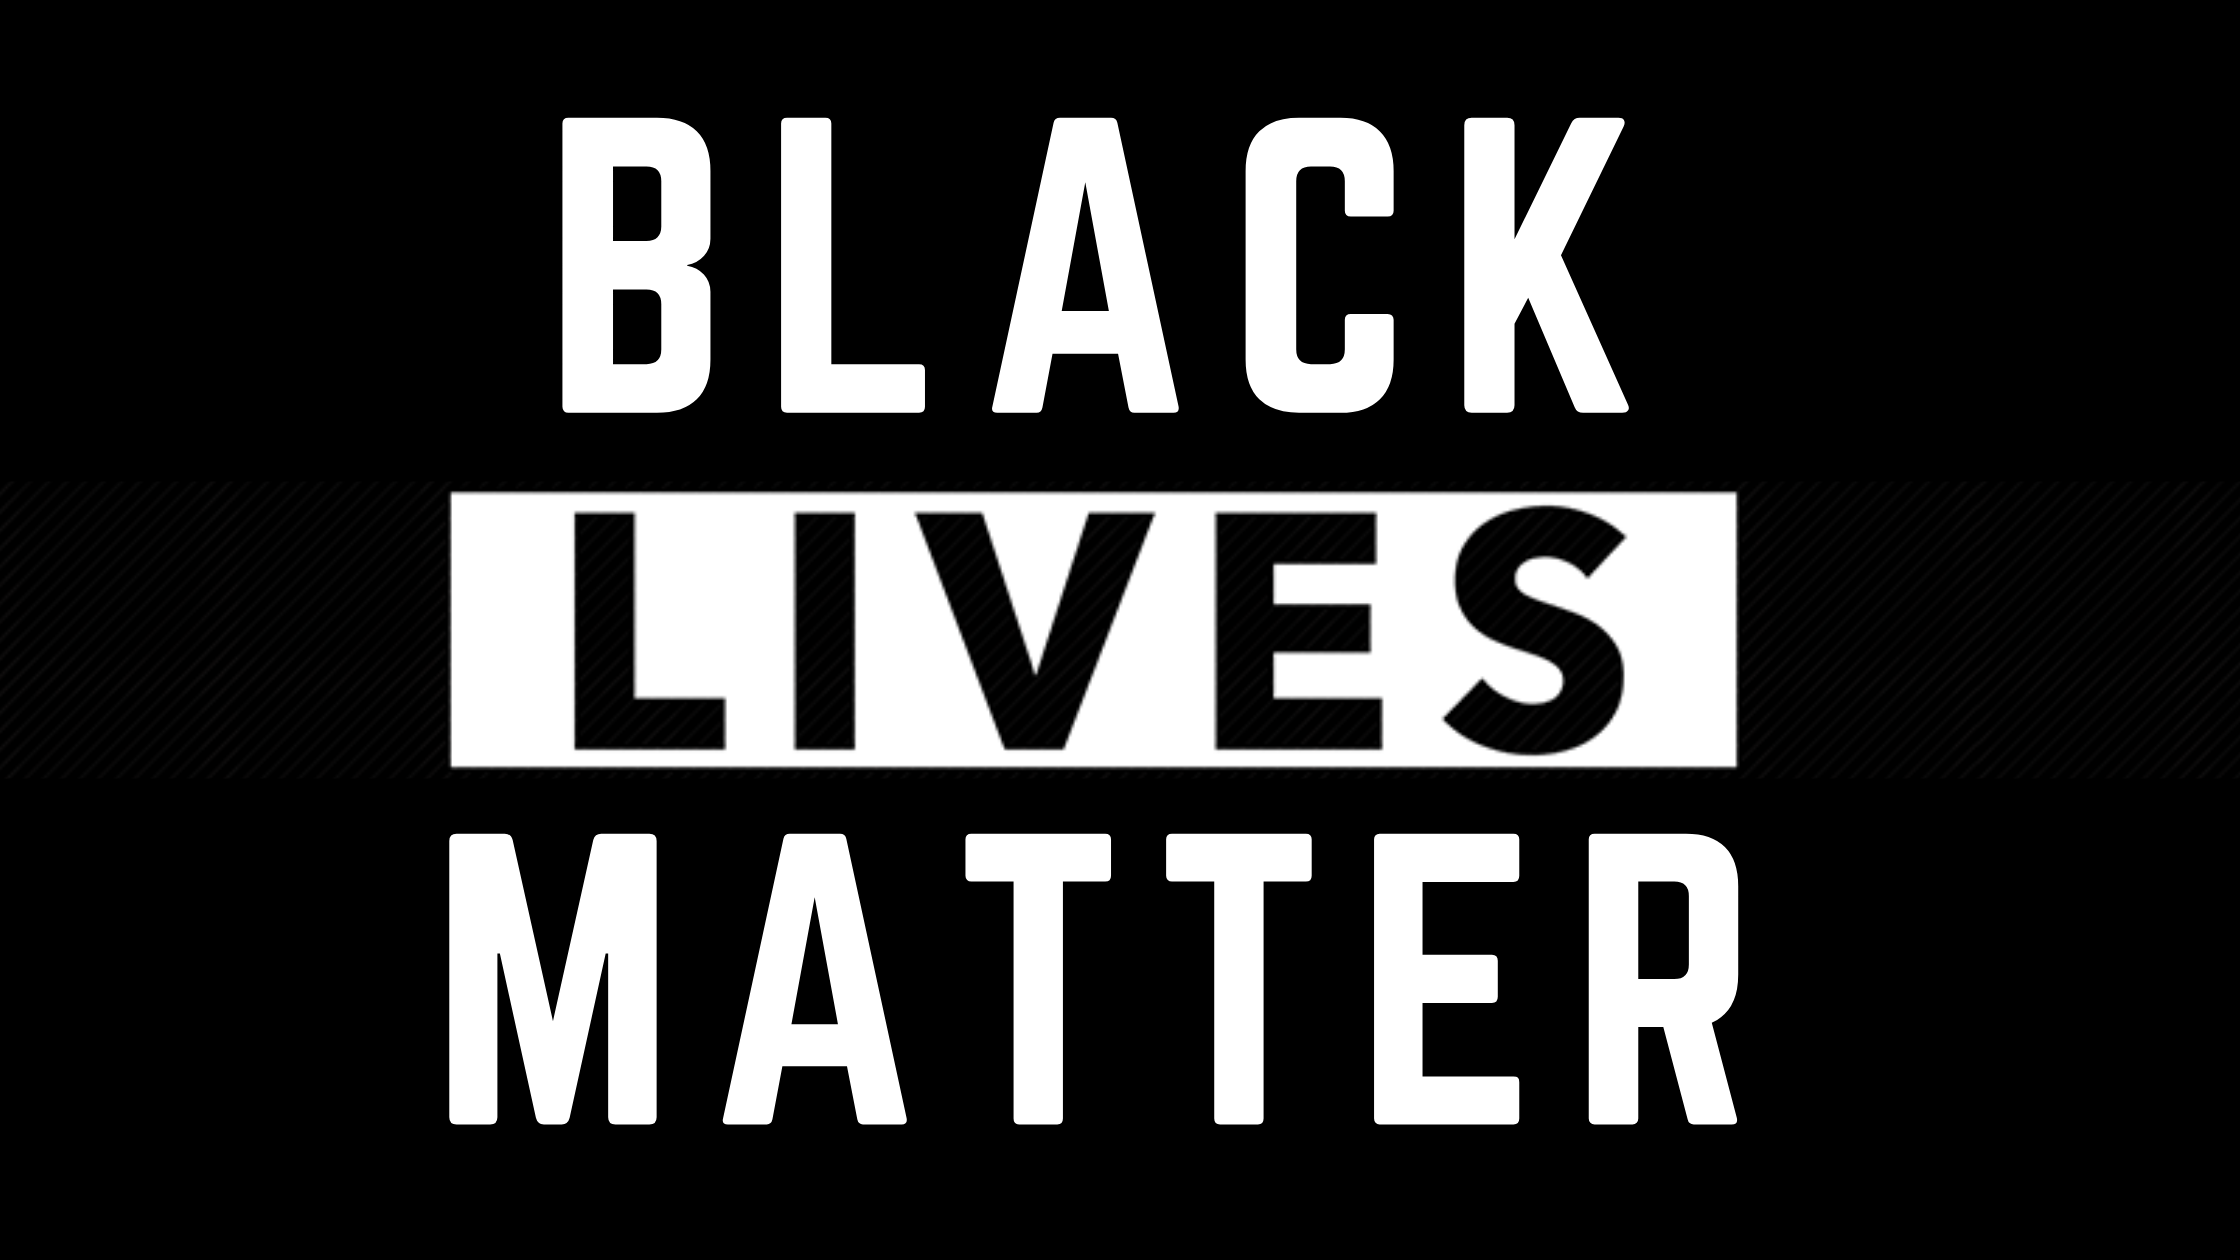 https://www.rtdl.org/2020/07/17/black-lives-matter/?preview_id=1212&preview_nonce=f5fc887063&post_format=link&_thumbnail_id=1213&preview=true